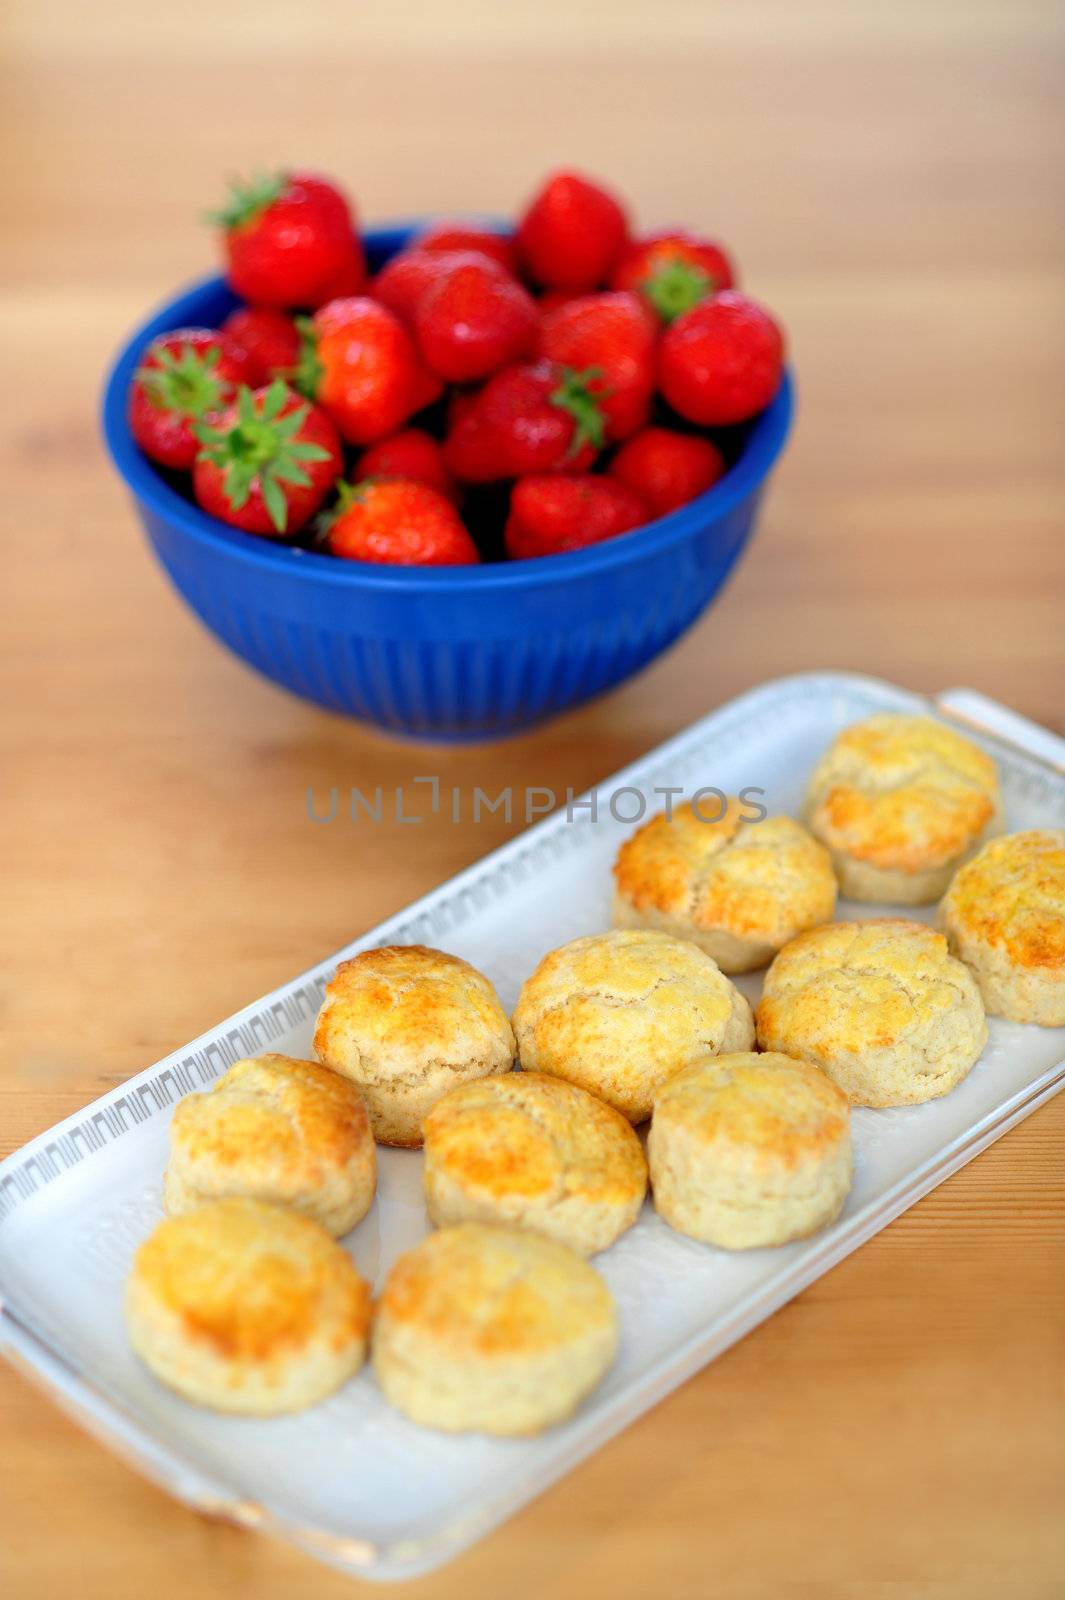 Strawberries and cookies for you by stockyimages